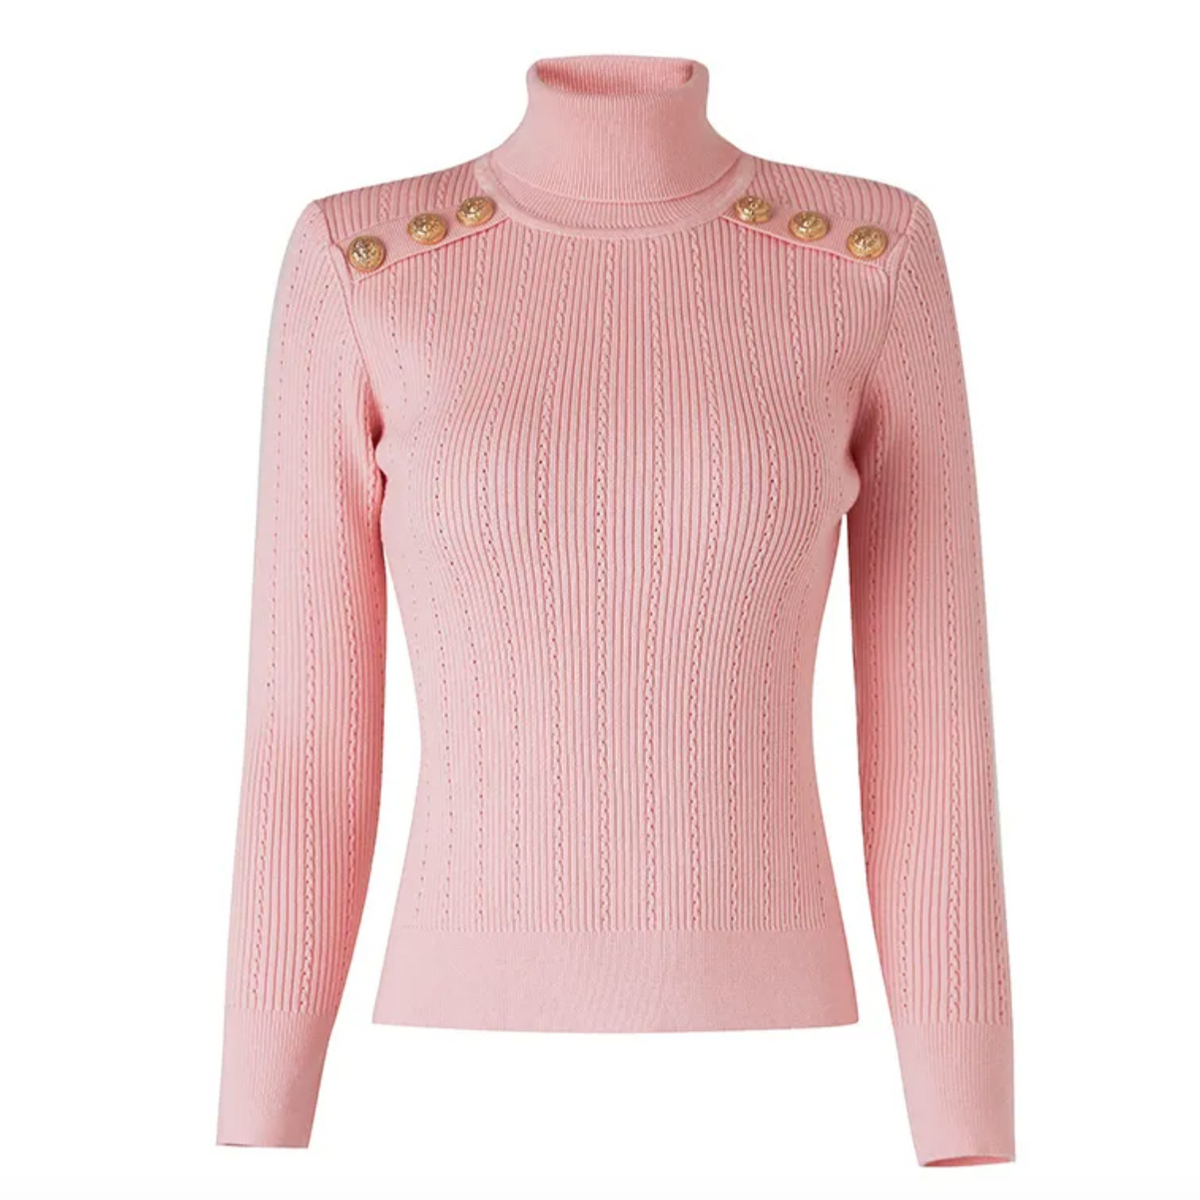 balmain inspired button detailed rollneck sweater is a sexy and sophisticated jumper made from soft ribbed knit, medium stretch fabric with beautiful button detailing. This turtleneck sweater is available in a series of colours and can be worn either casually or dressed up!  baby pink